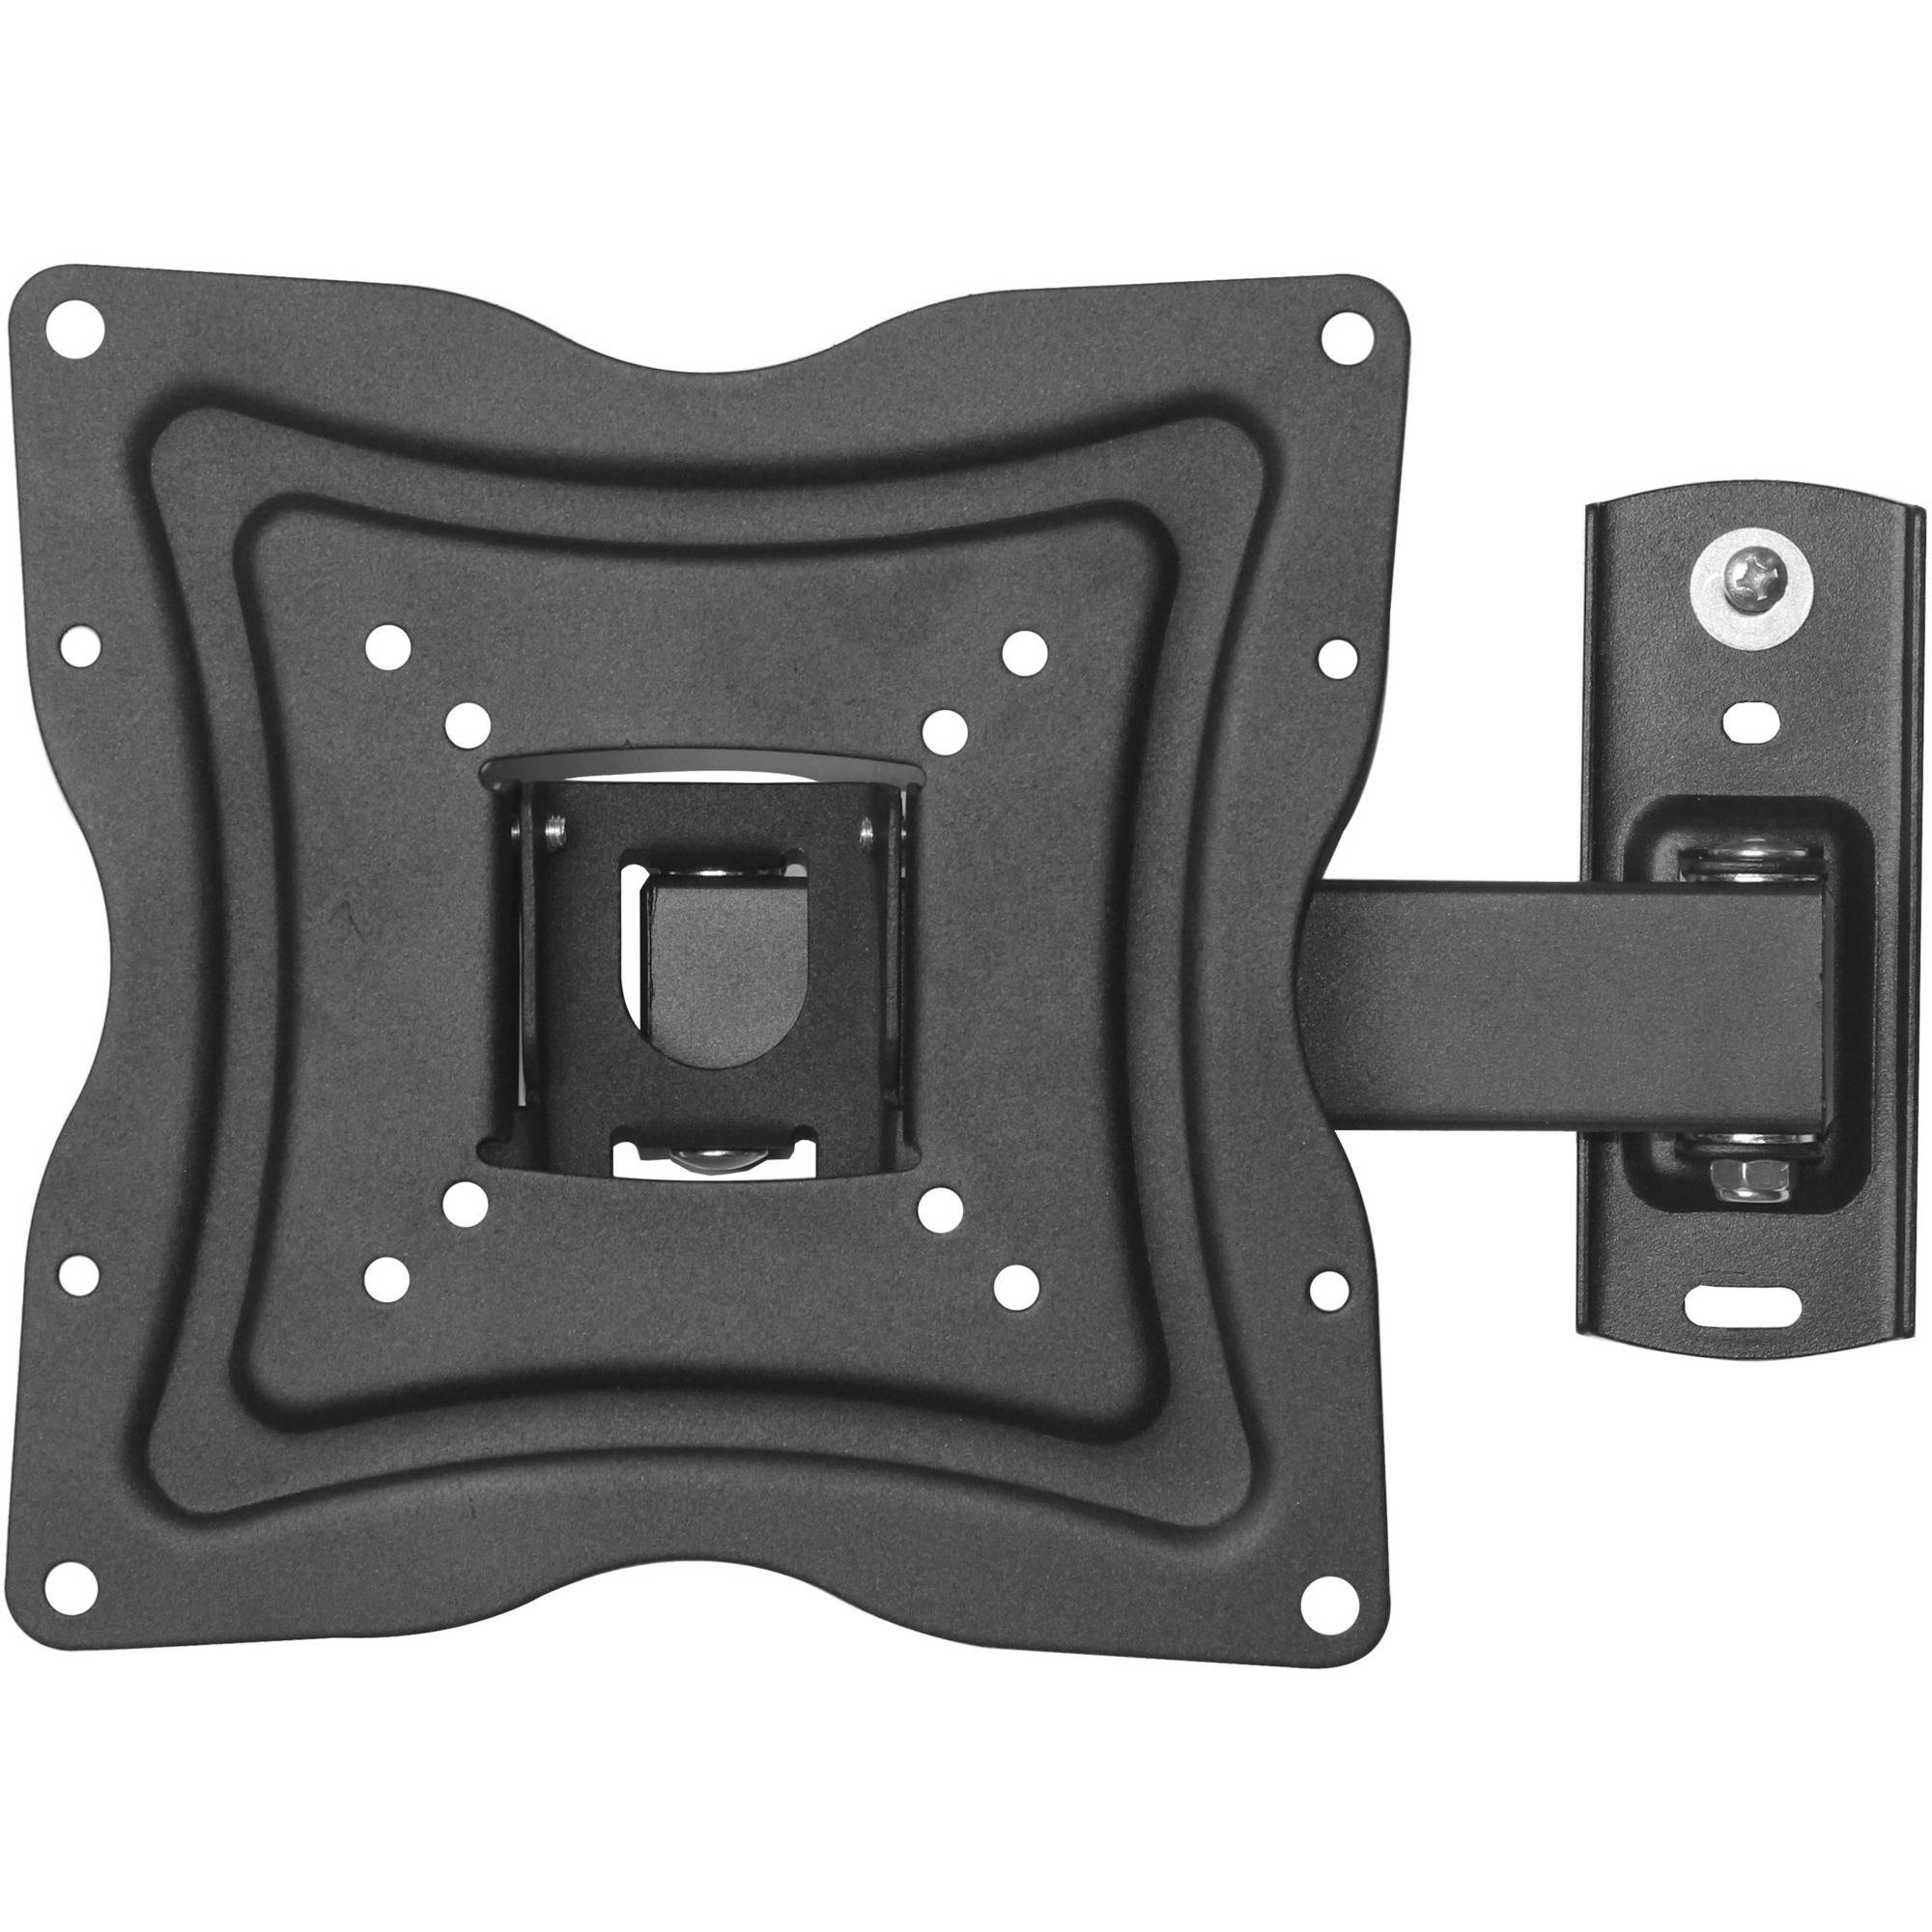 Full Motion TV Wall Mount 10" to 50" TV Display Tilt, Swivel Articulating Arm, HDMI Cable Included - image 2 of 7